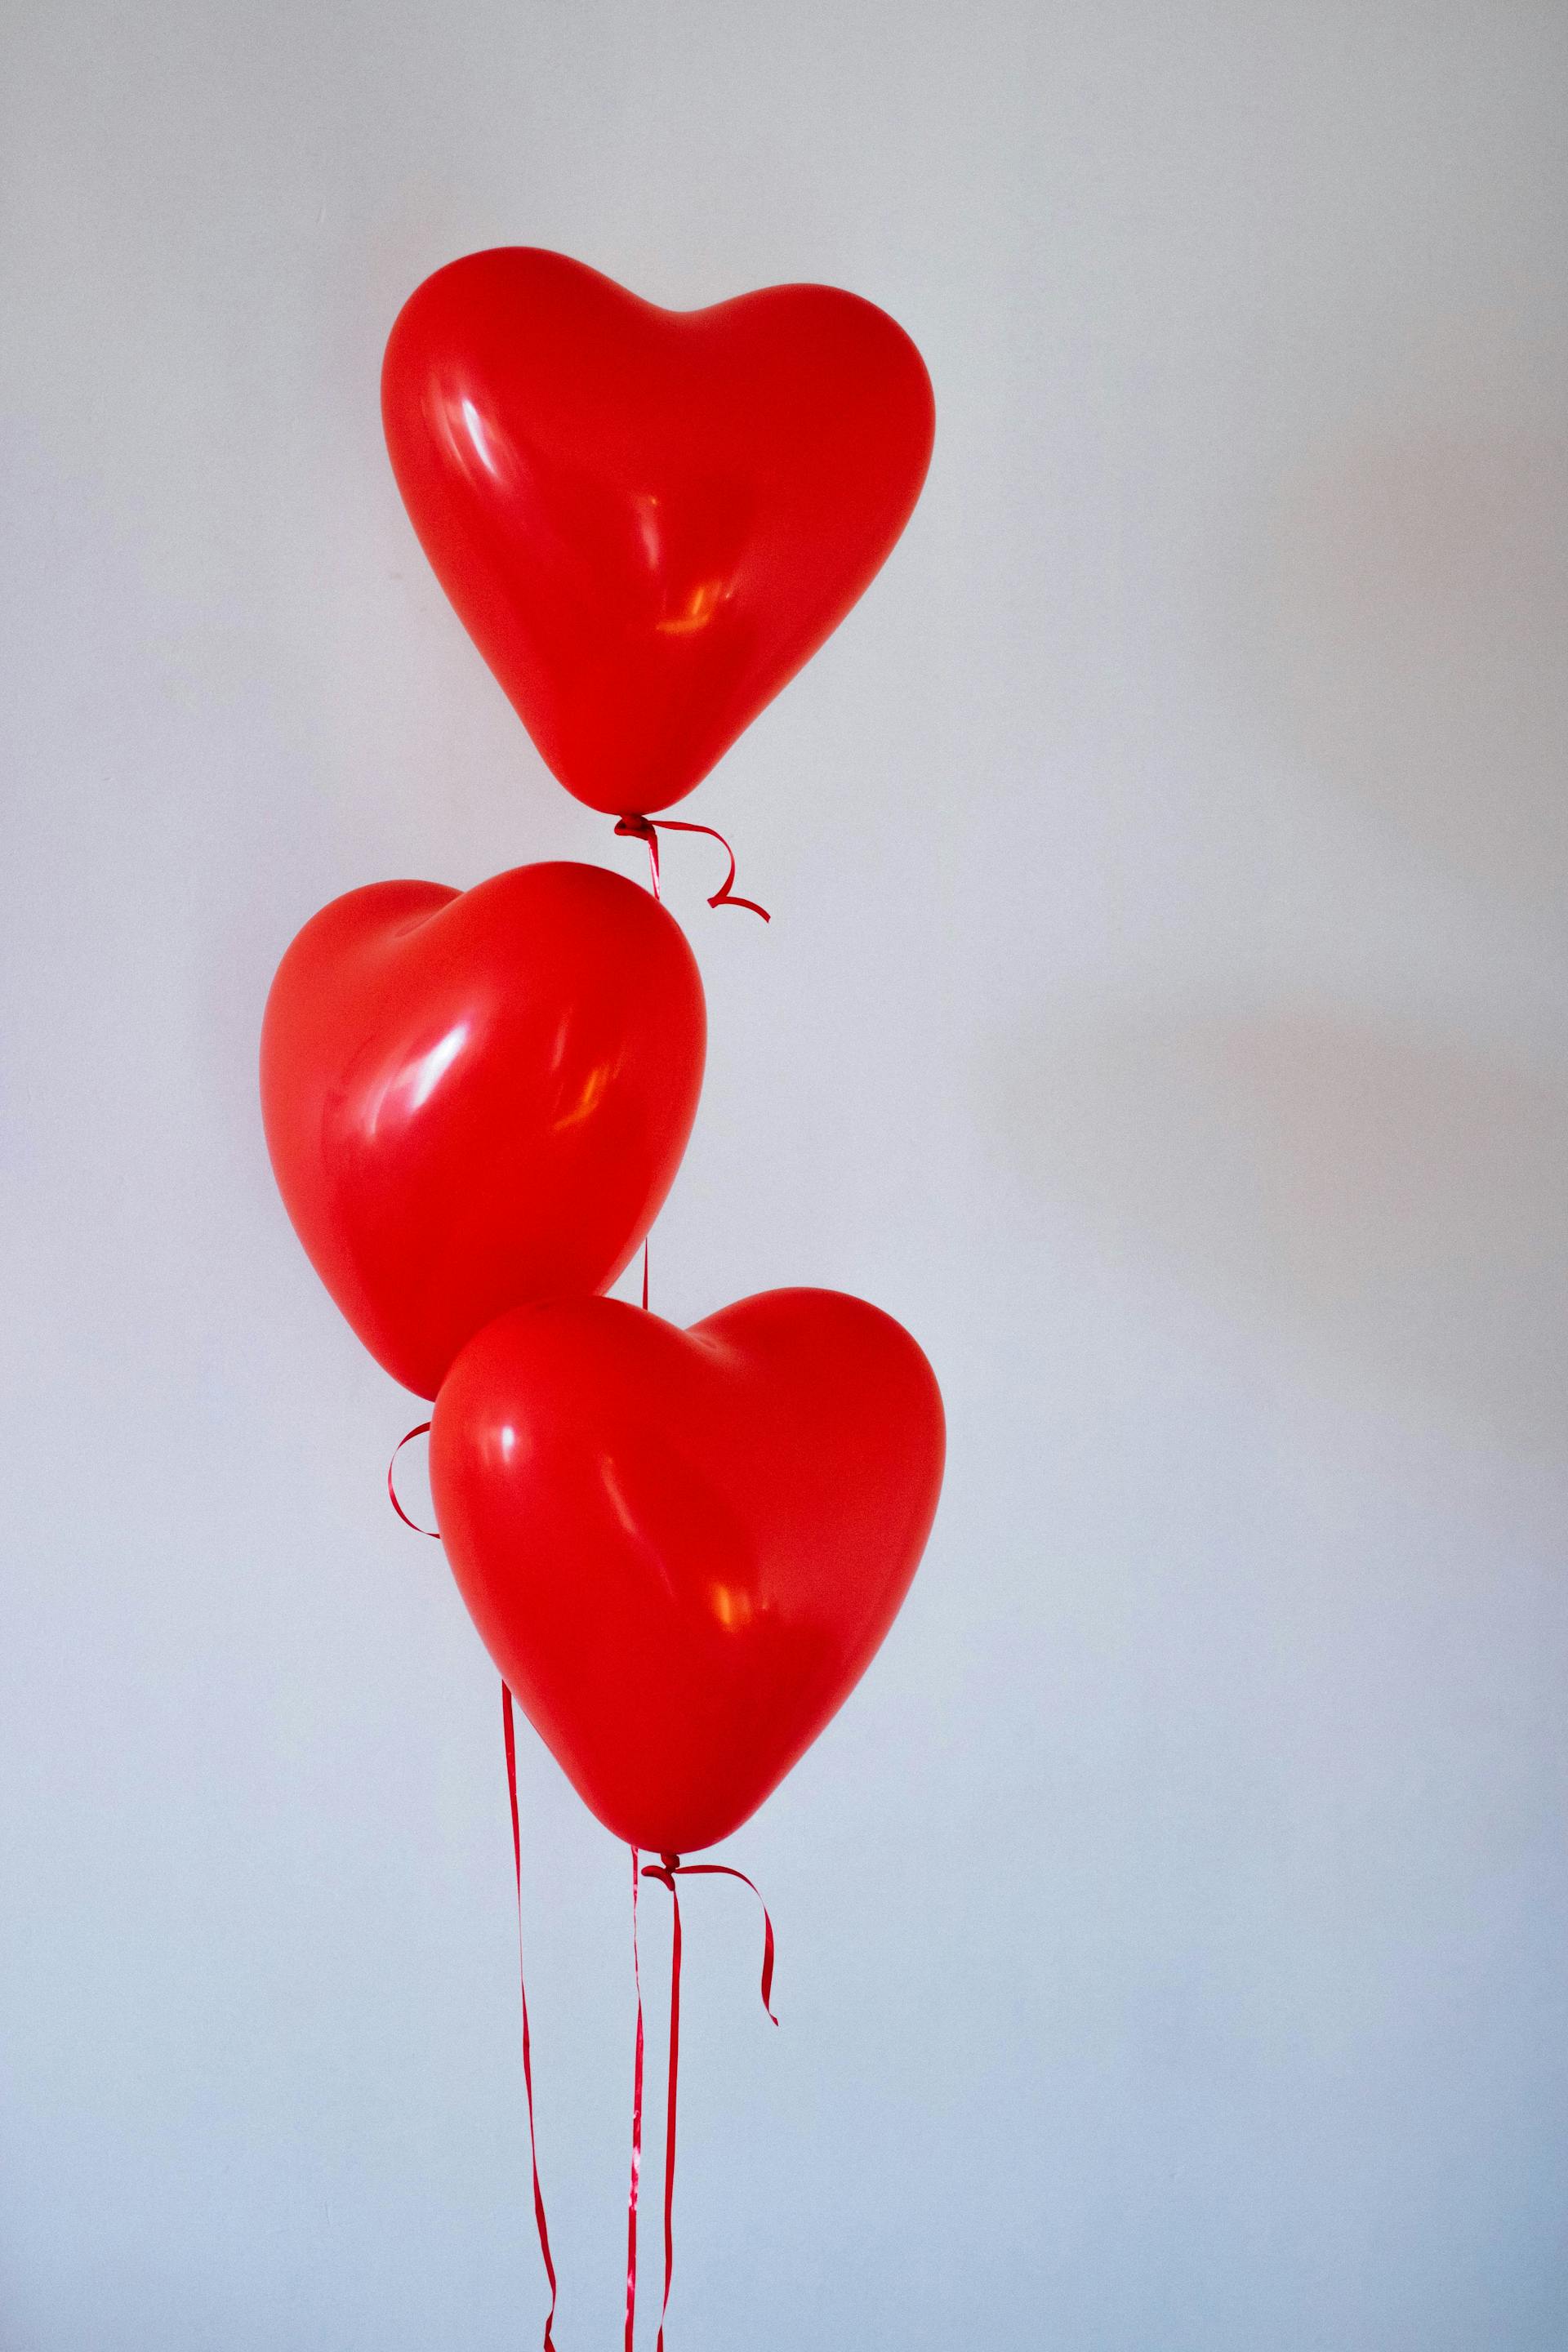 Three red heart-shaped balloons | Source: Pexels